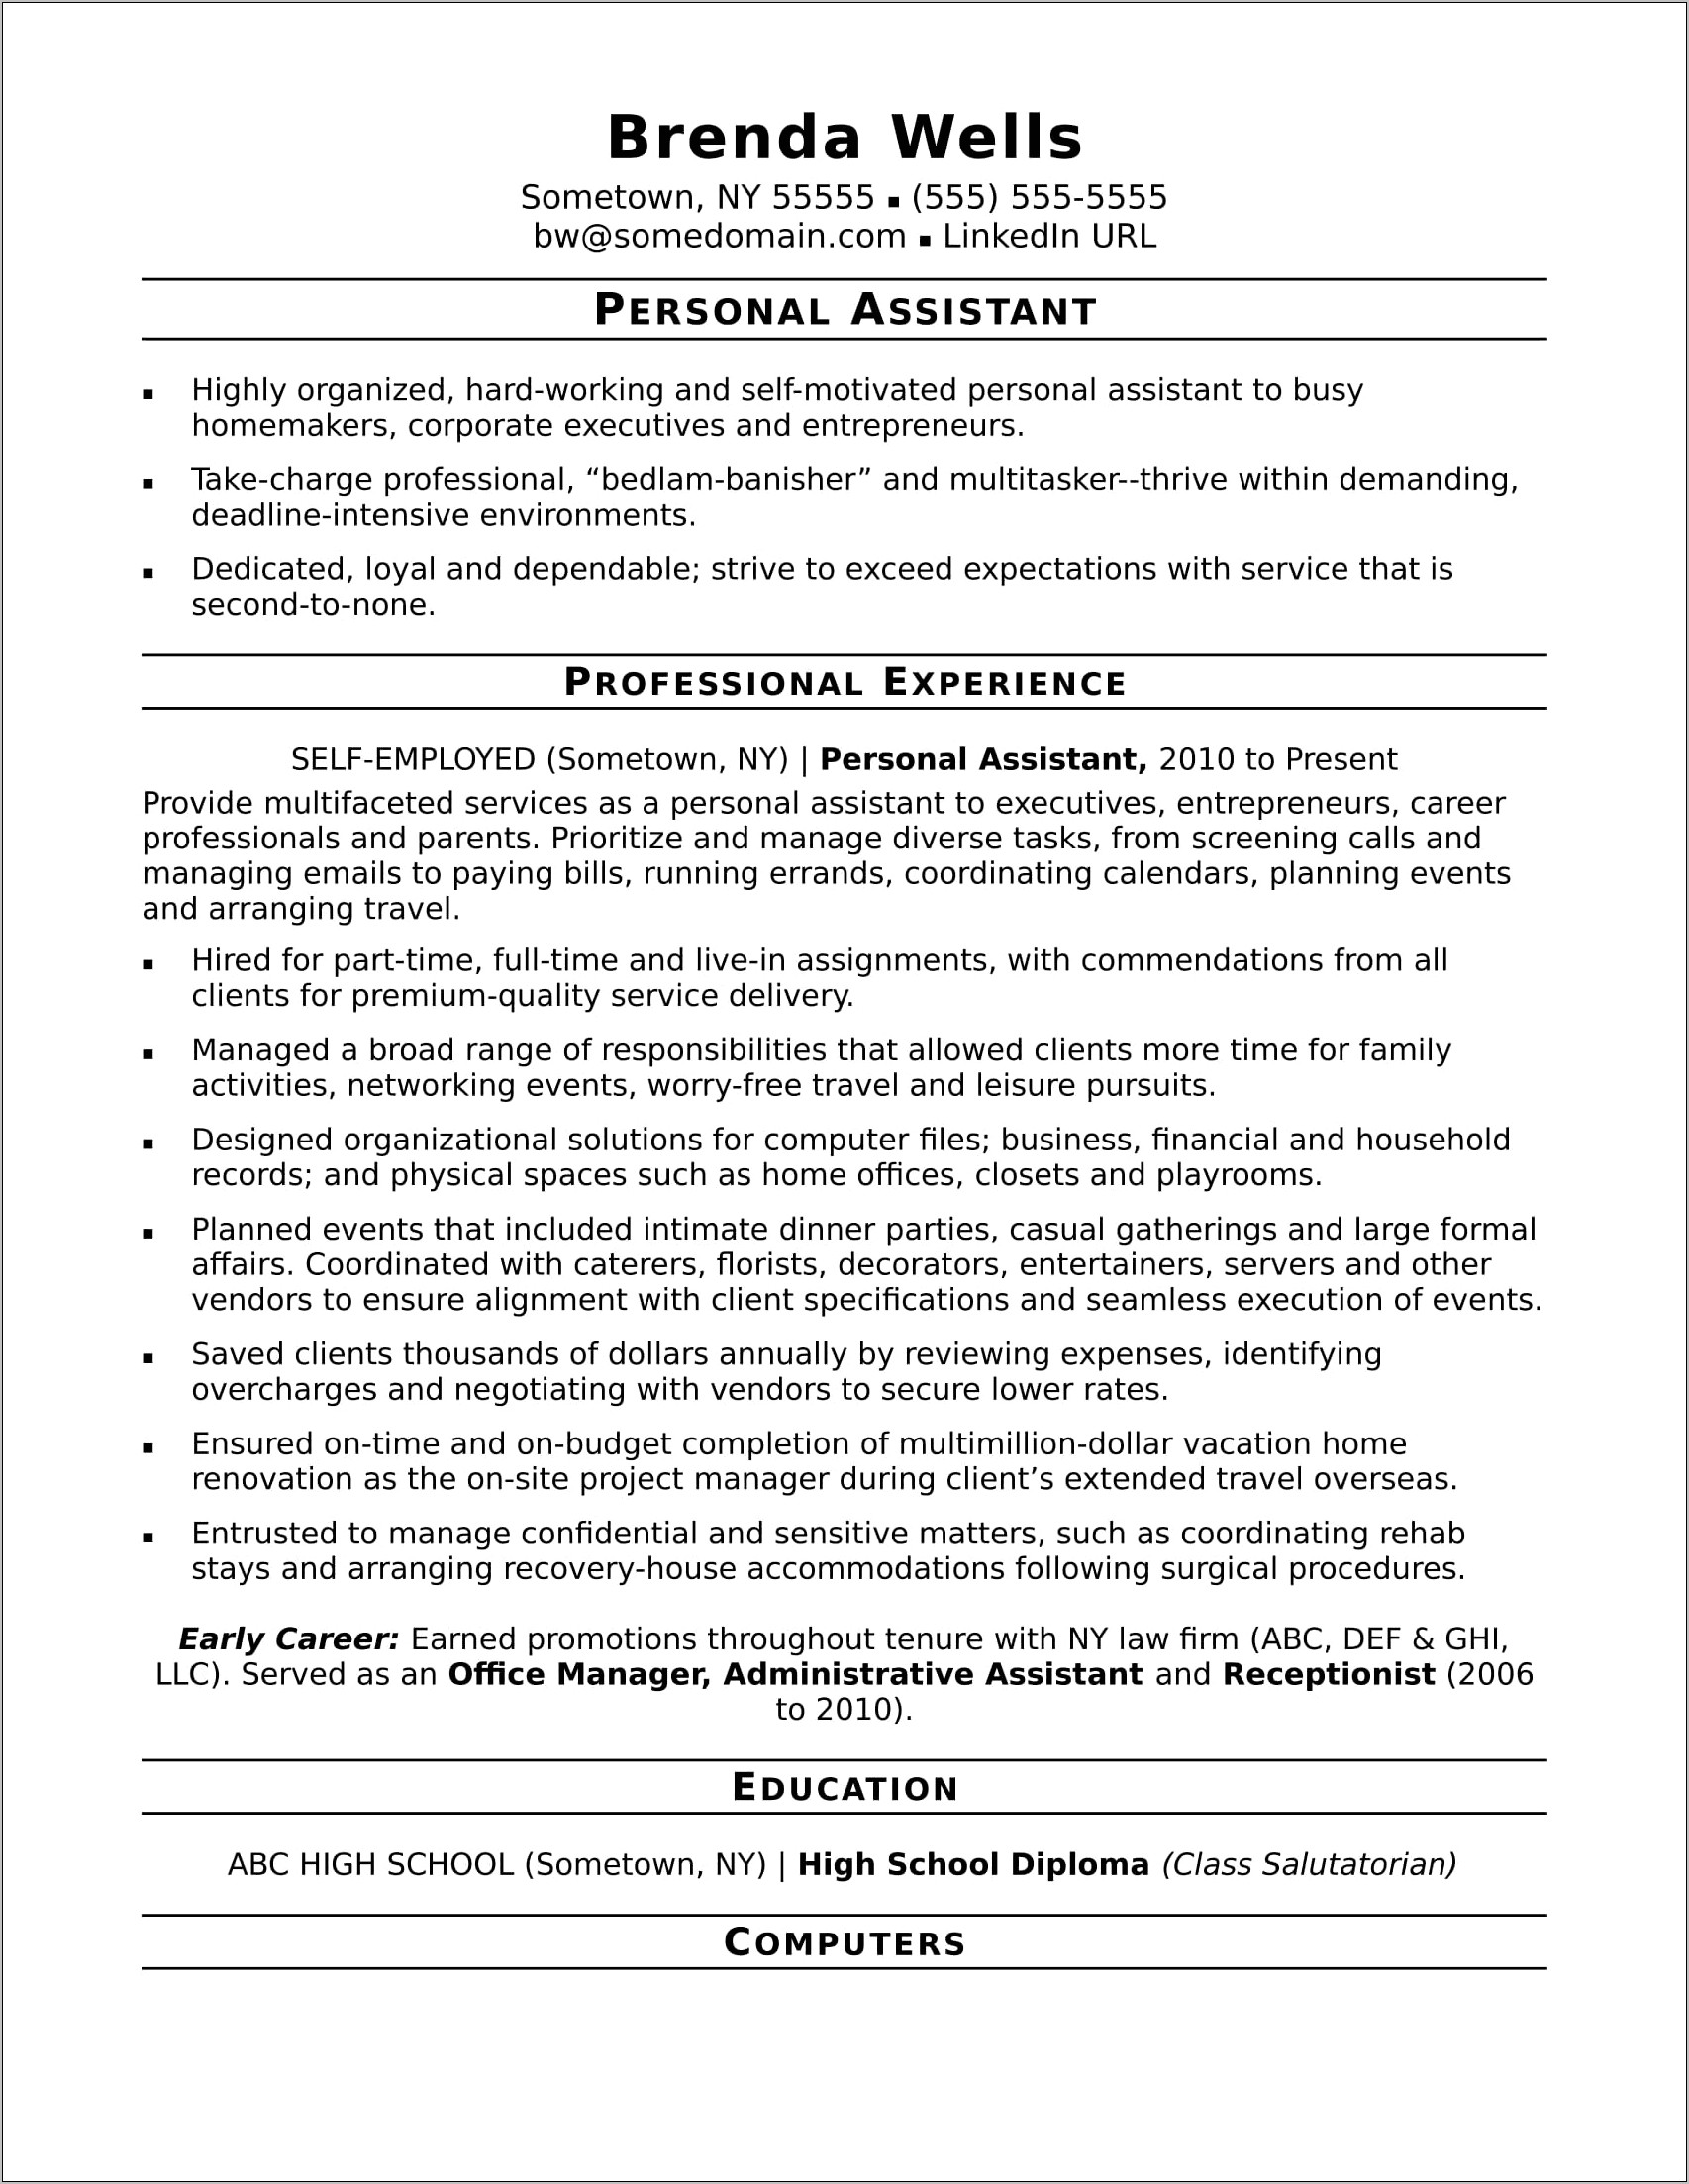 Higher Paying Jobs With Receptionist Experience Resume